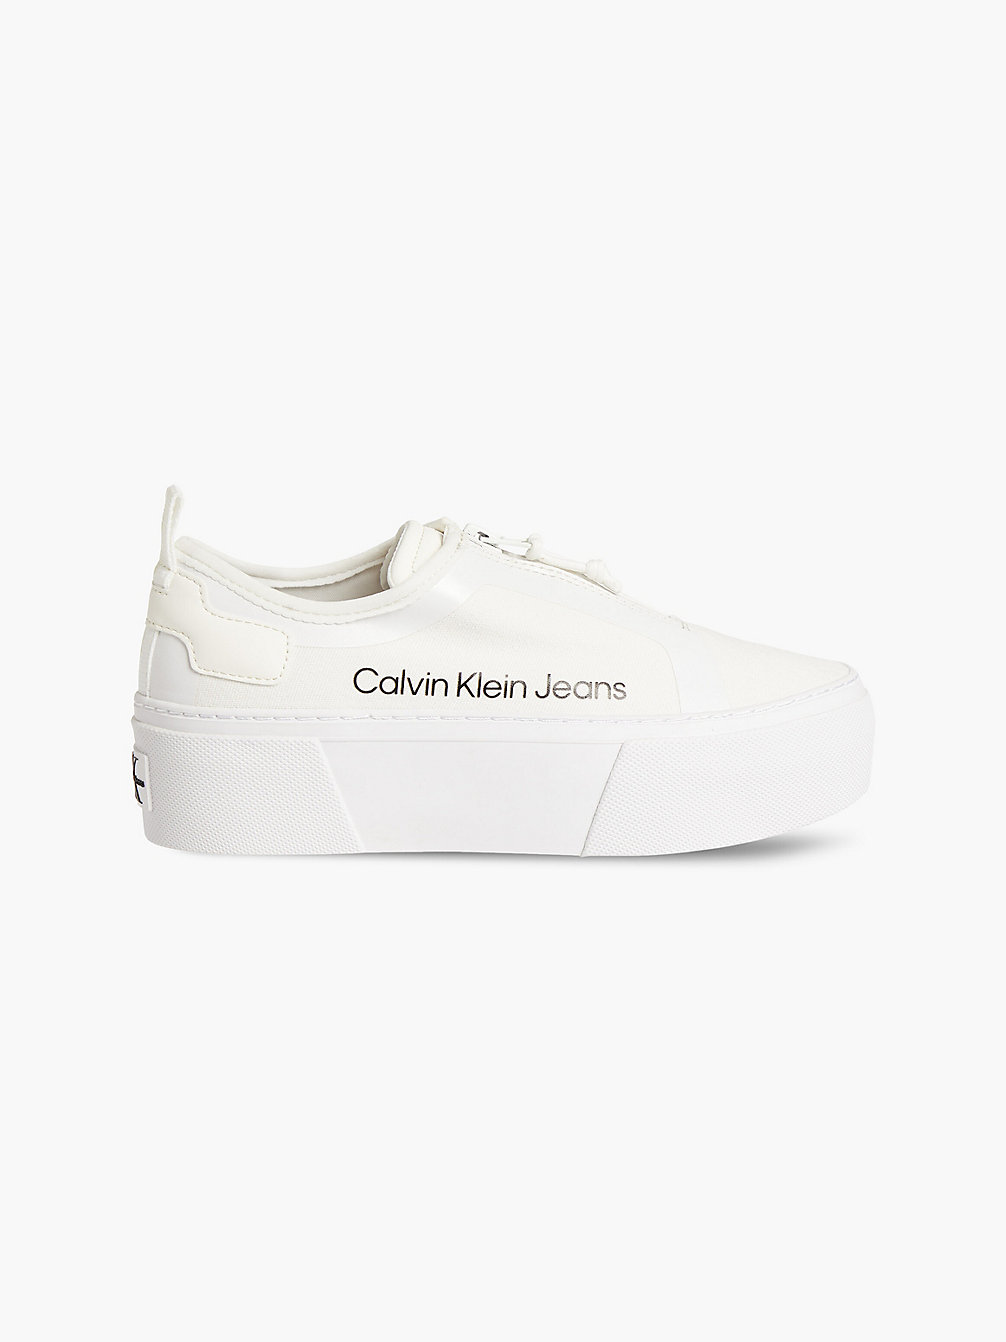 WHITE/OFFWHITE > Plateausneakers Van Gerecycled Canvas Met Rits > undefined dames - Calvin Klein